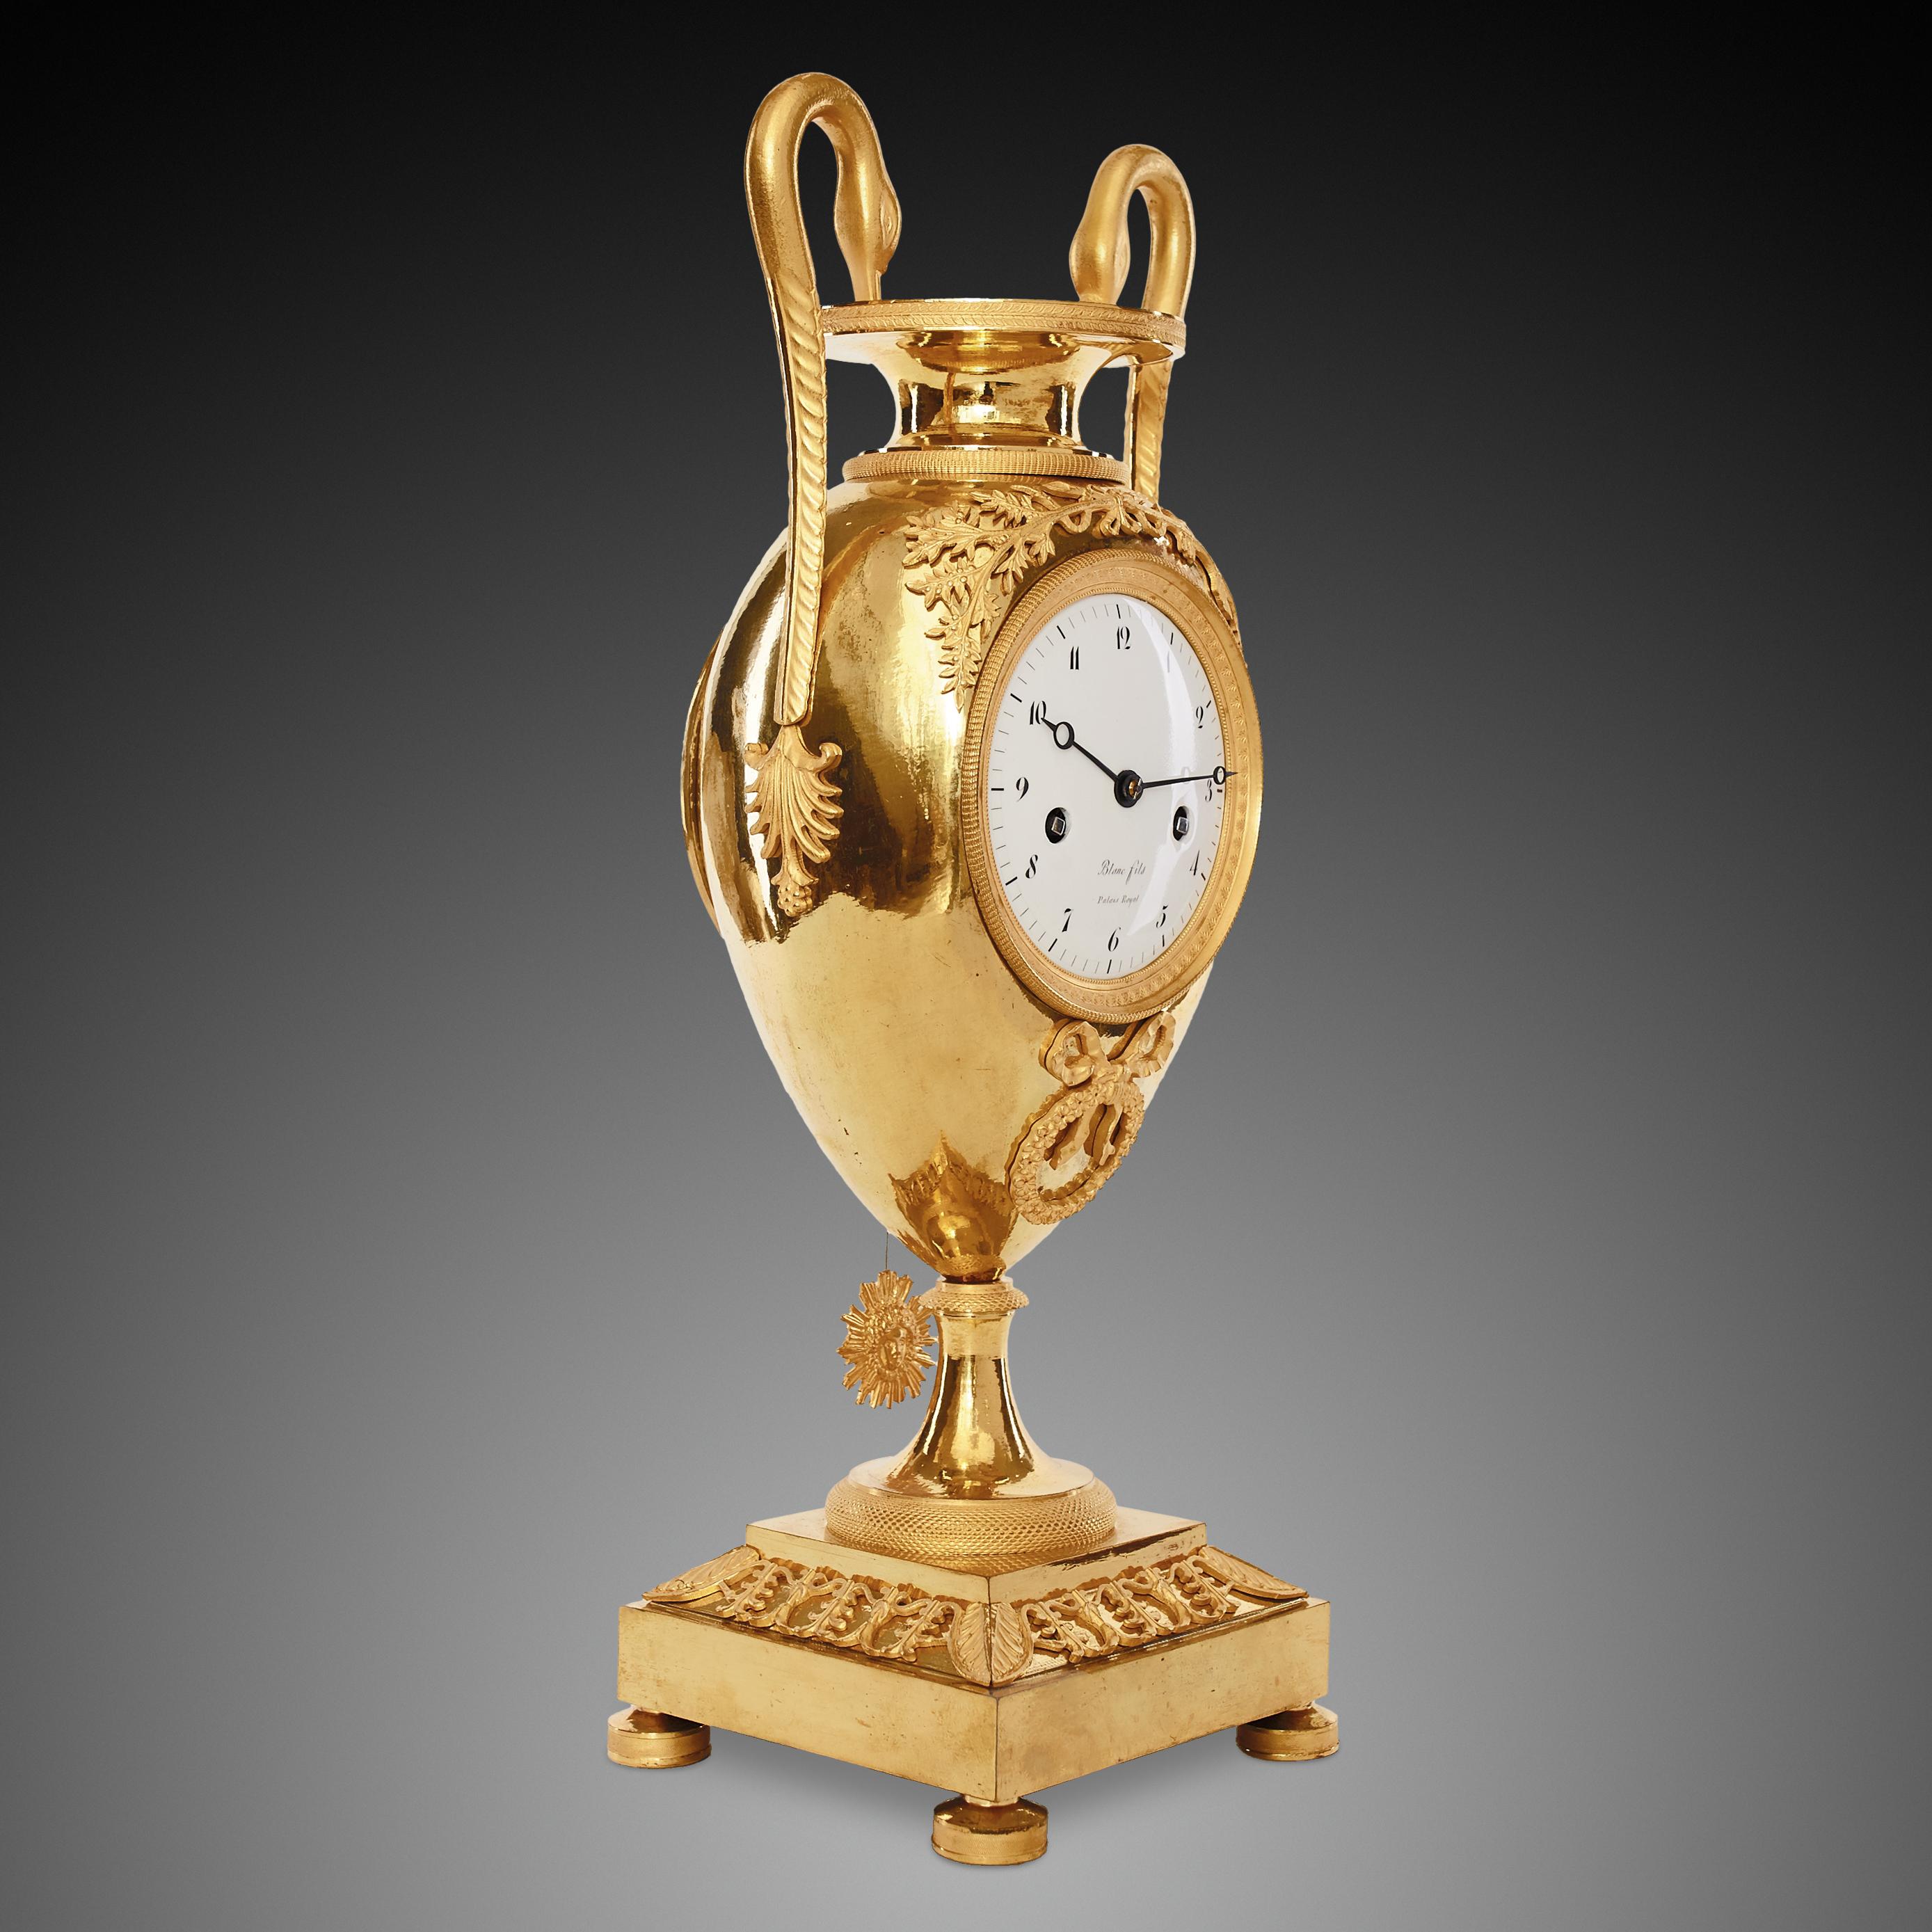 This finely chiseled vase clock was cast from bronze with gilded elements originated from the first half of the nineteenth century. The Empire style was based on elements of the Roman Empire and its culture, which had been rediscovered starting in